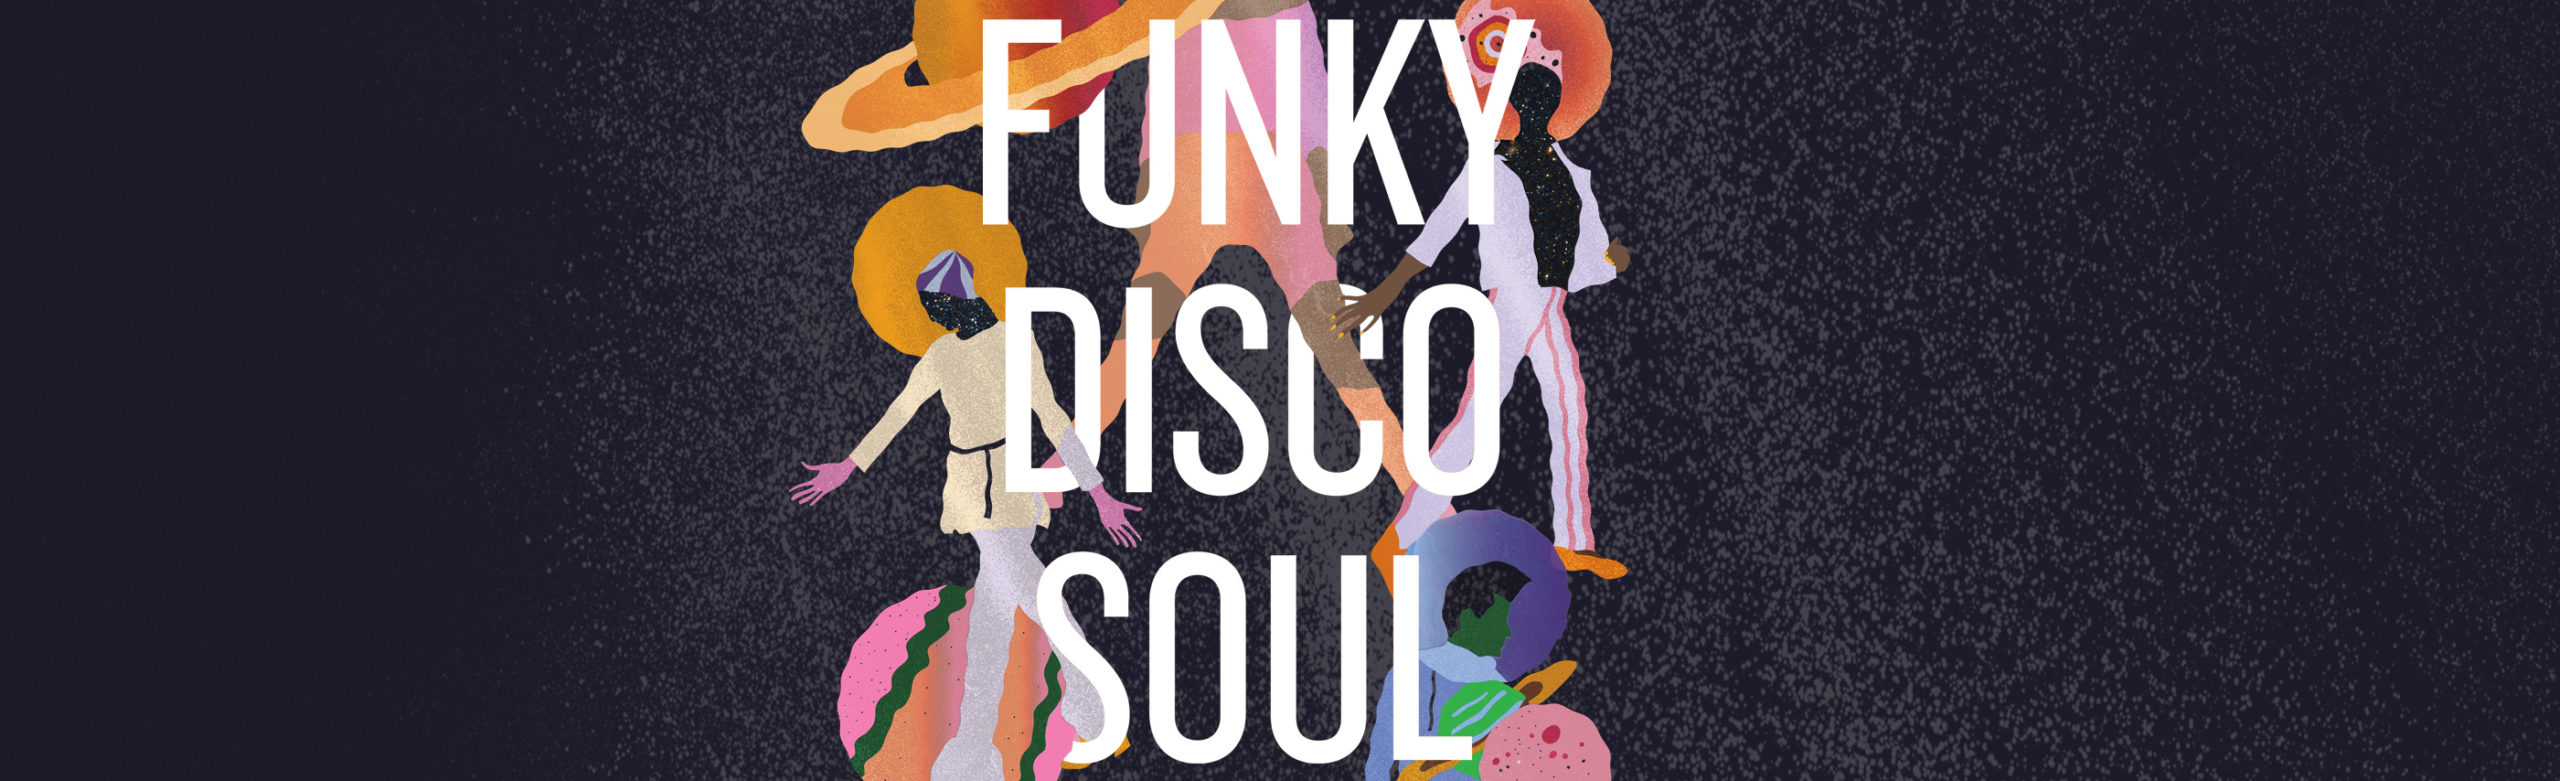 Funky, Disco, Soul Series Announced at the Top Hat featuring Mark Myriad & Friends Image